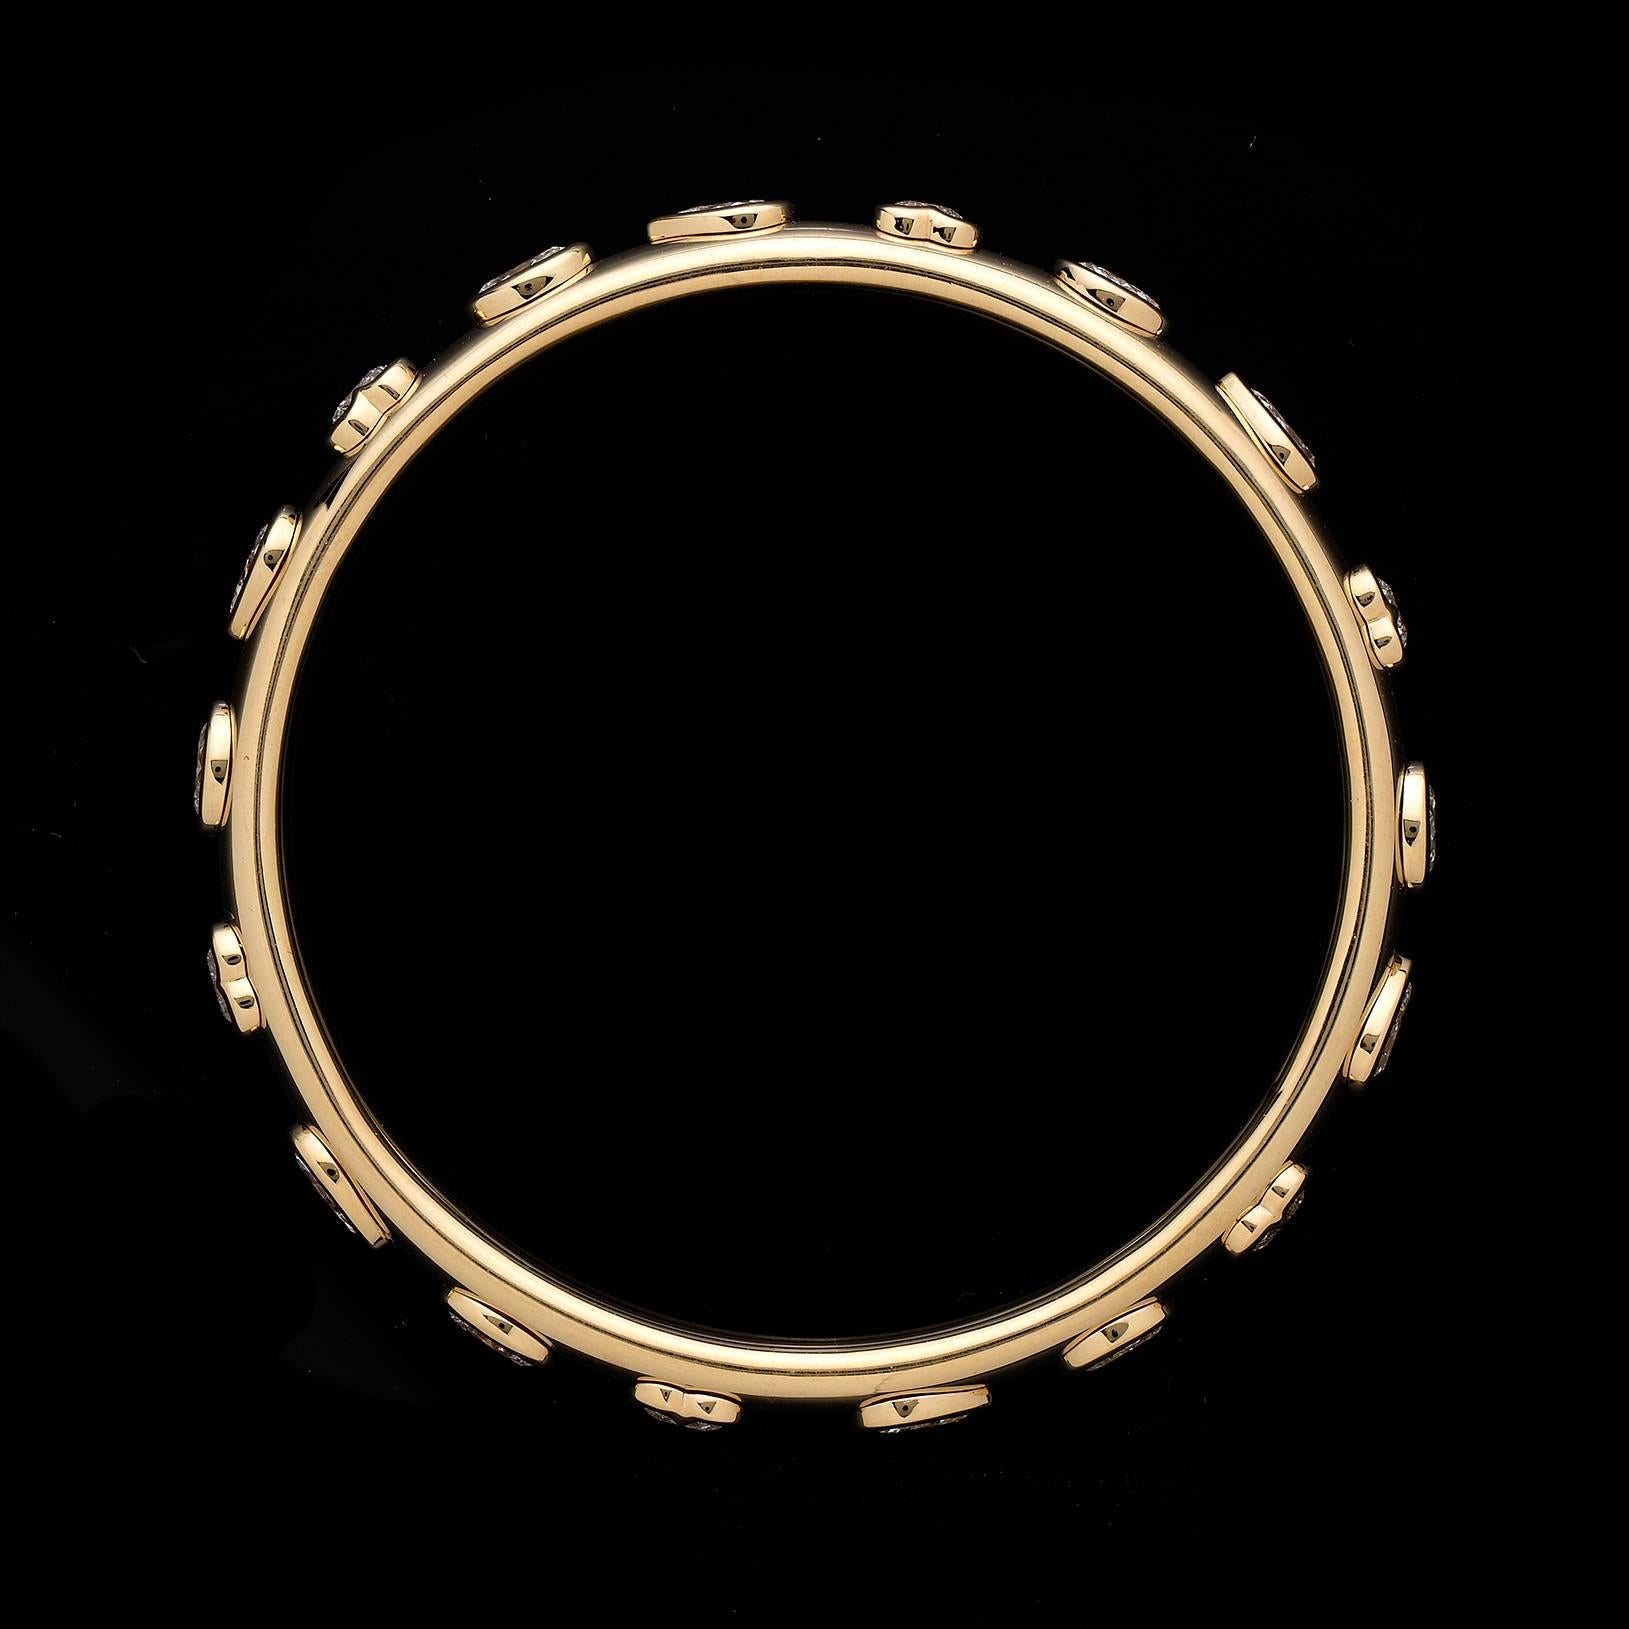 The 18k yellow gold bangle bracelet is decorated all the way around with 18 bezel-set assorted fancy shaped diamonds, including heart, pear, and oval-shaped, and round brilliant-cut diamonds, all together weighing a total of 9.58 carats. The bangle